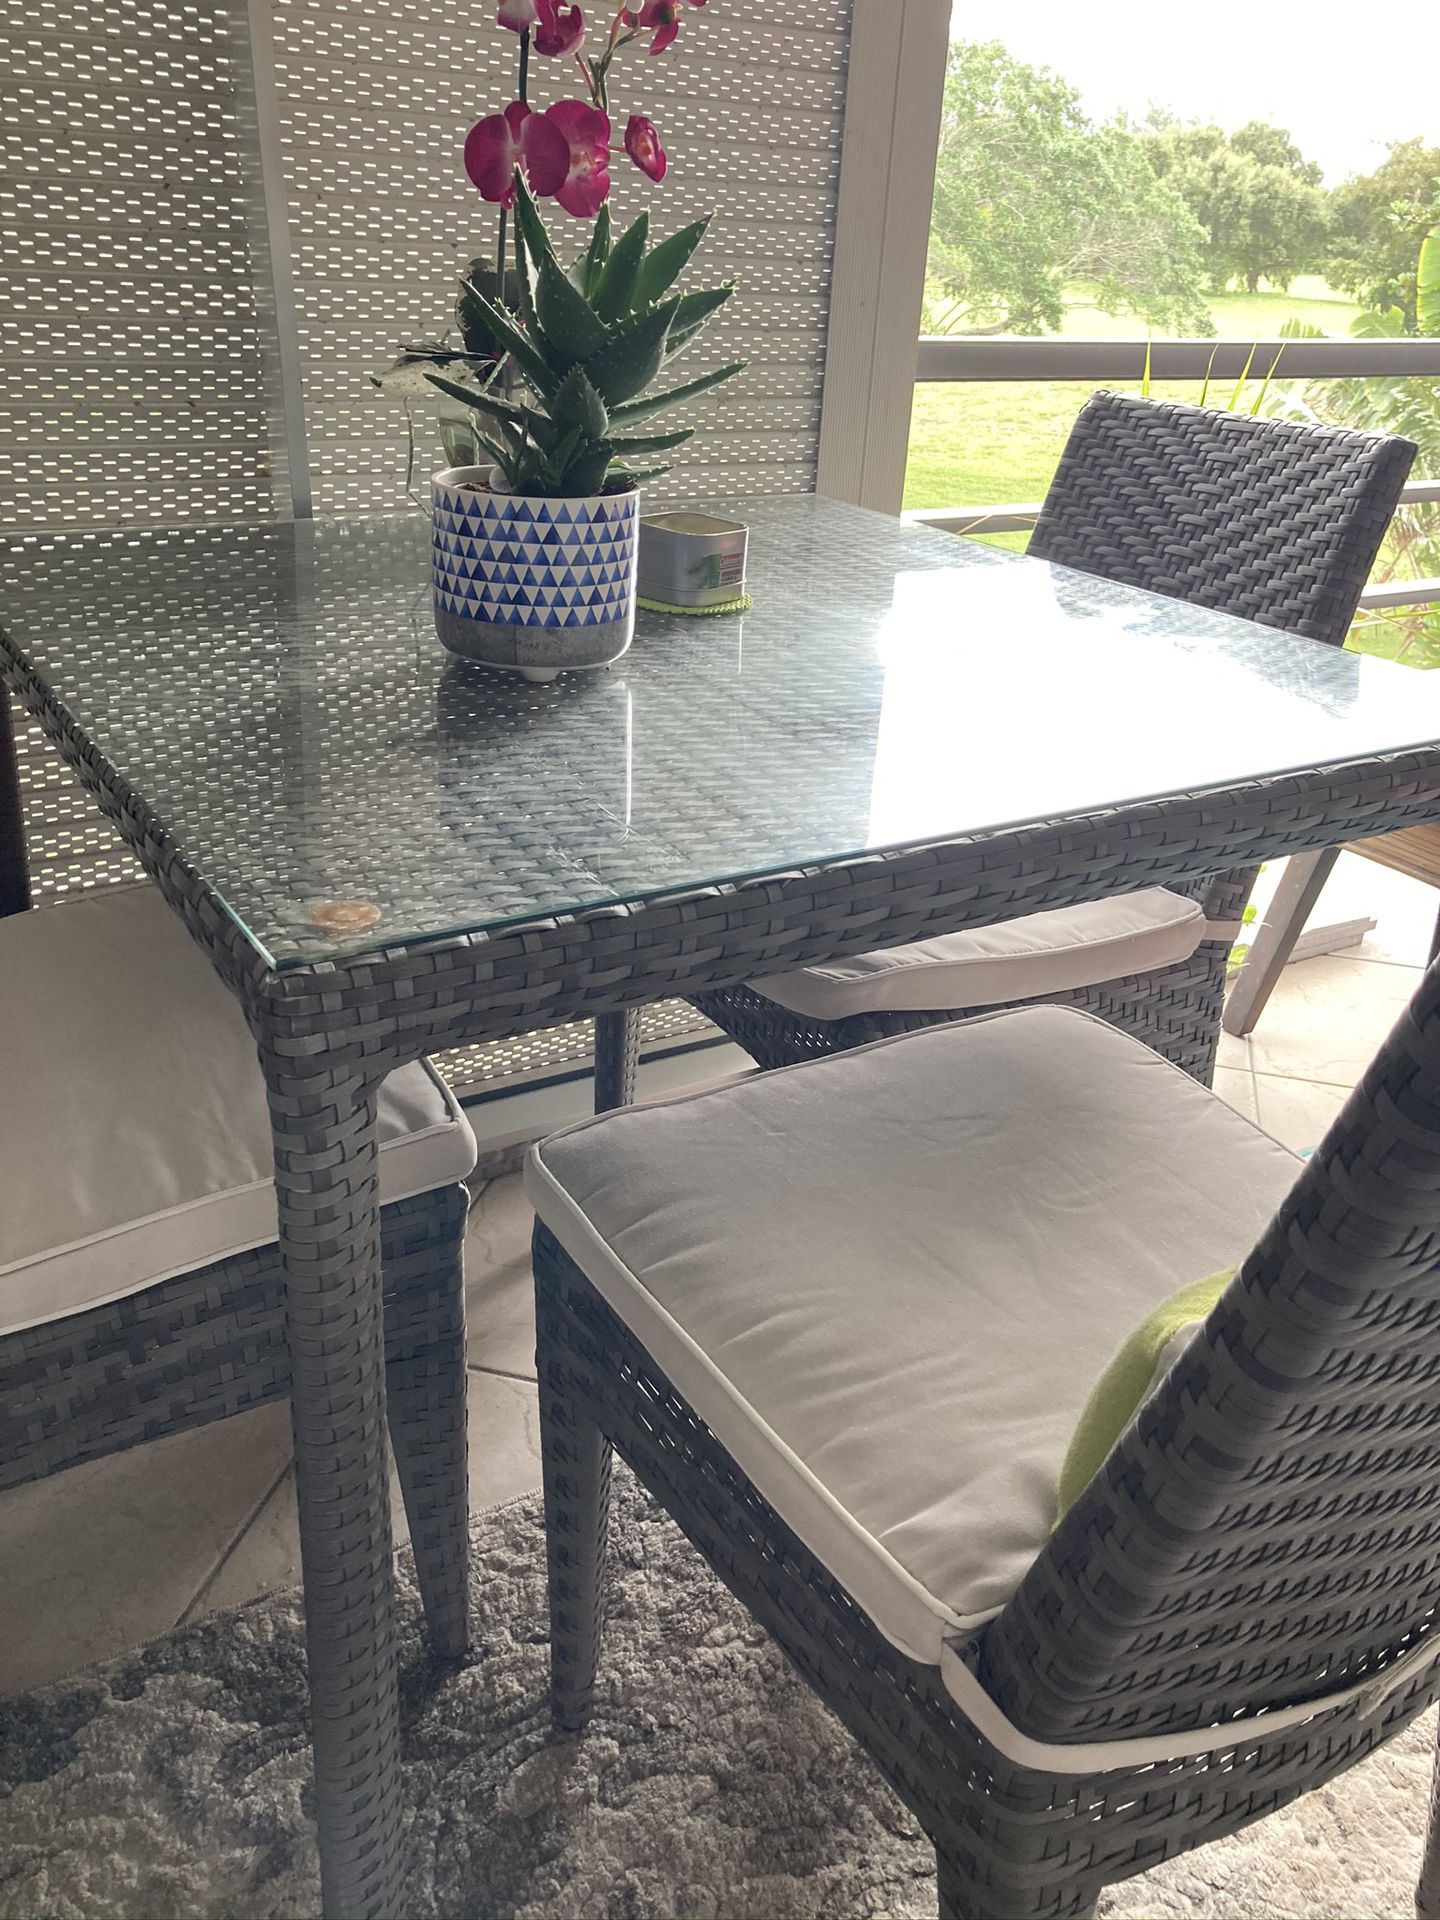 PATIO FURNITURE, MODERN DESIGN AND WATER RESISTANT!